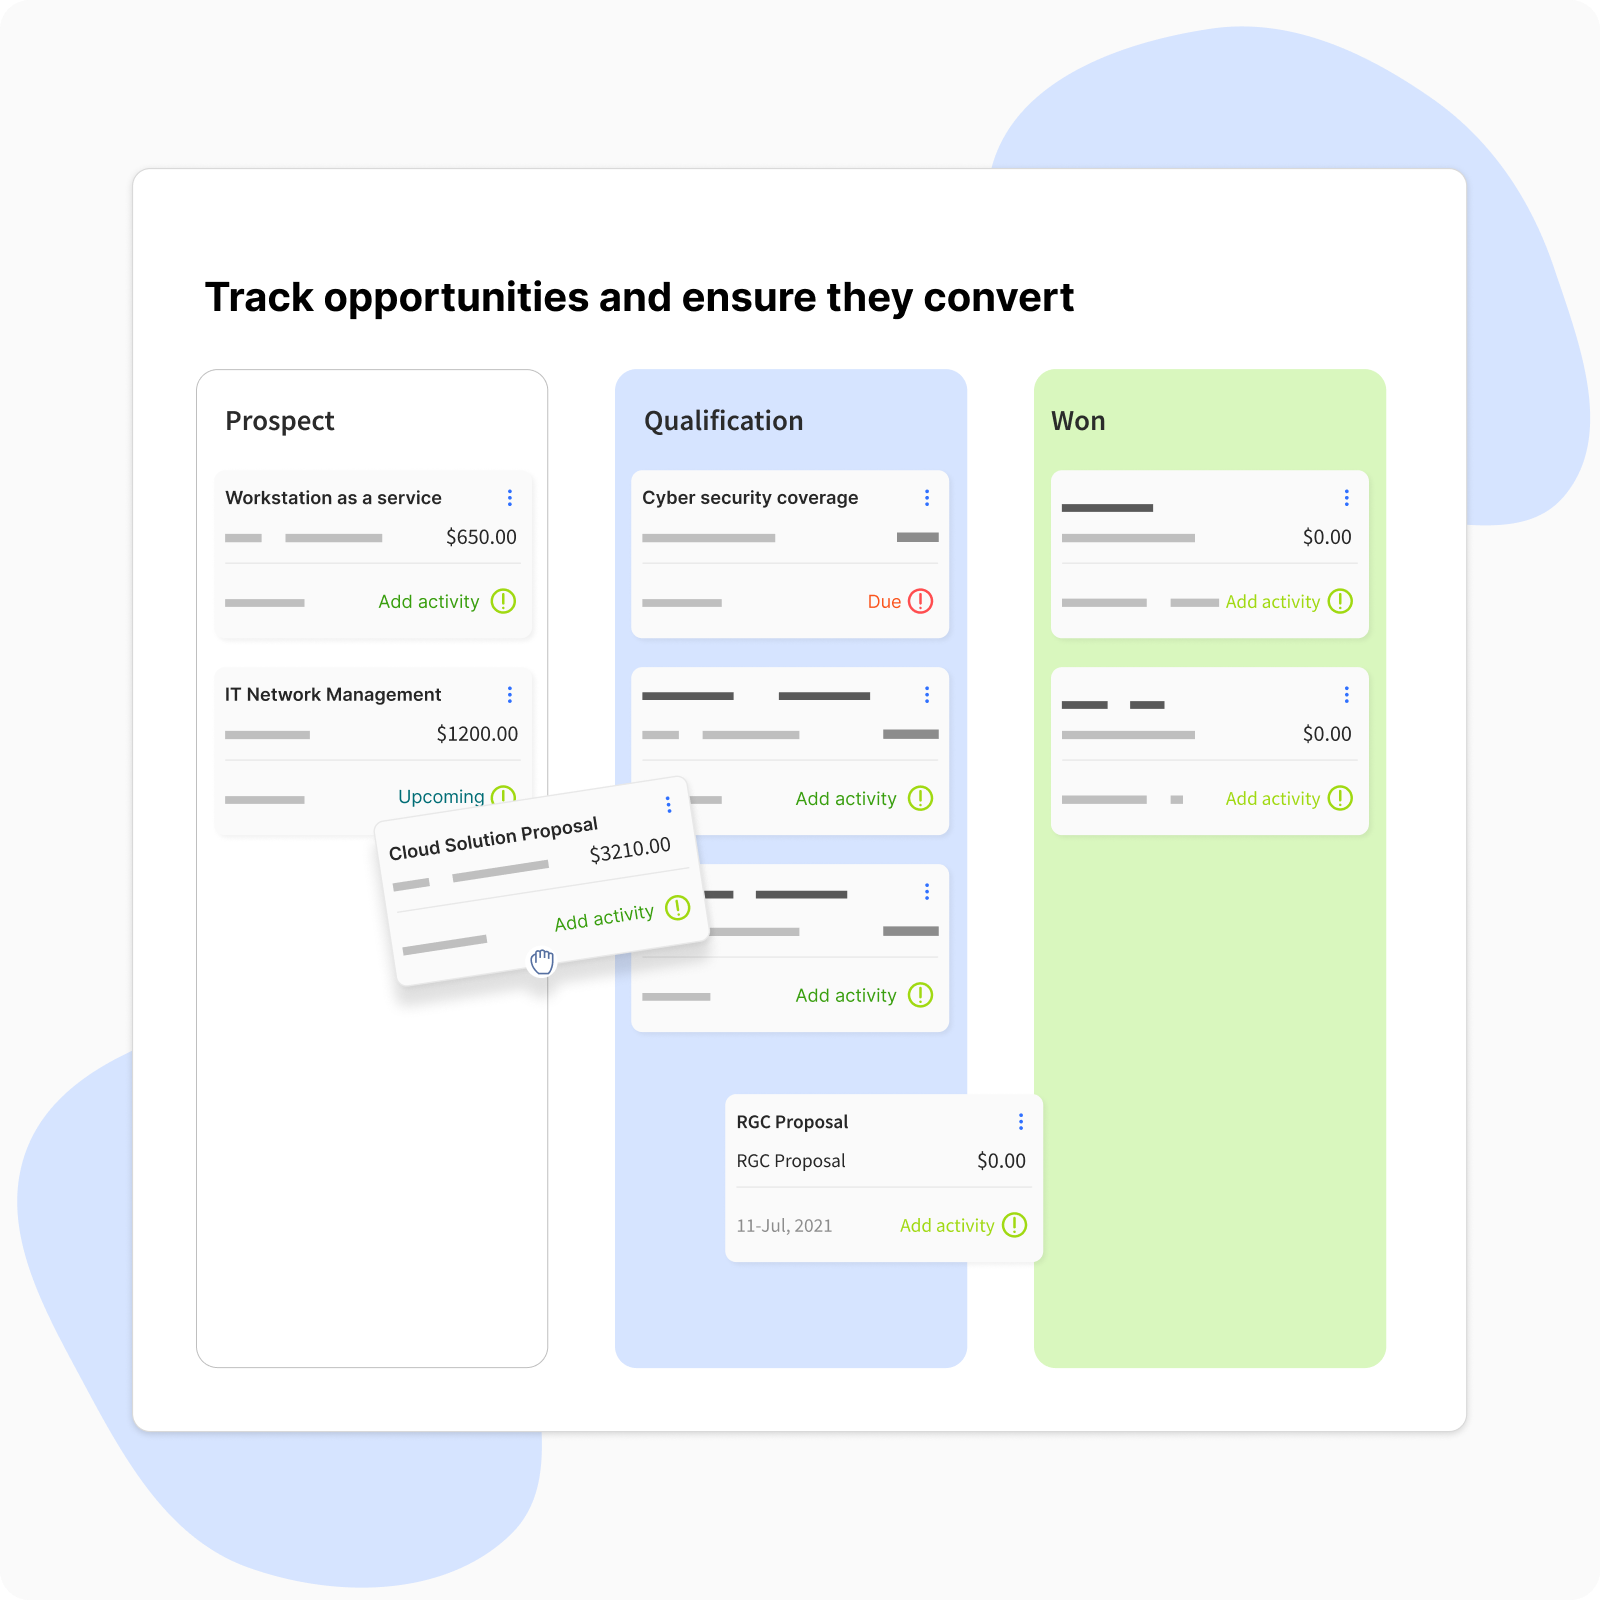 Track opportunities and ensure they convert